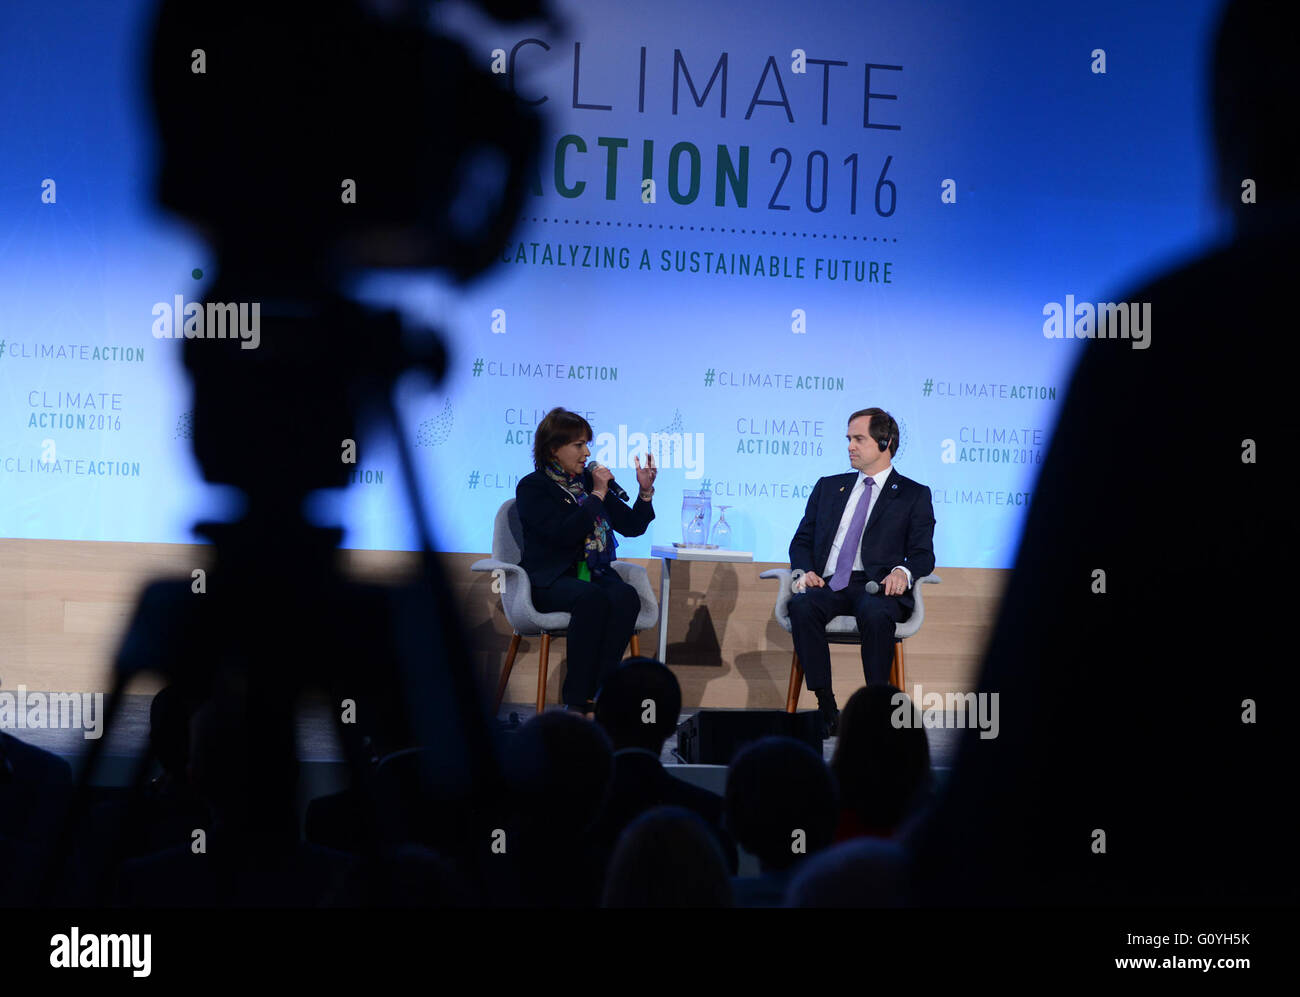 Washington, USA. 5th May, 2016. Hakima El Haite (L, Rear), Morocco's Minister of Energy, Mines, Water and Environment, attends a discussion at the Climate Action 2016 summit, a two-day meeting seeking to accelerate global action on climate change, in Washington, DC, the United States, on May 5, 2016. Credit:  Jiao Min/Xinhua/Alamy Live News Stock Photo